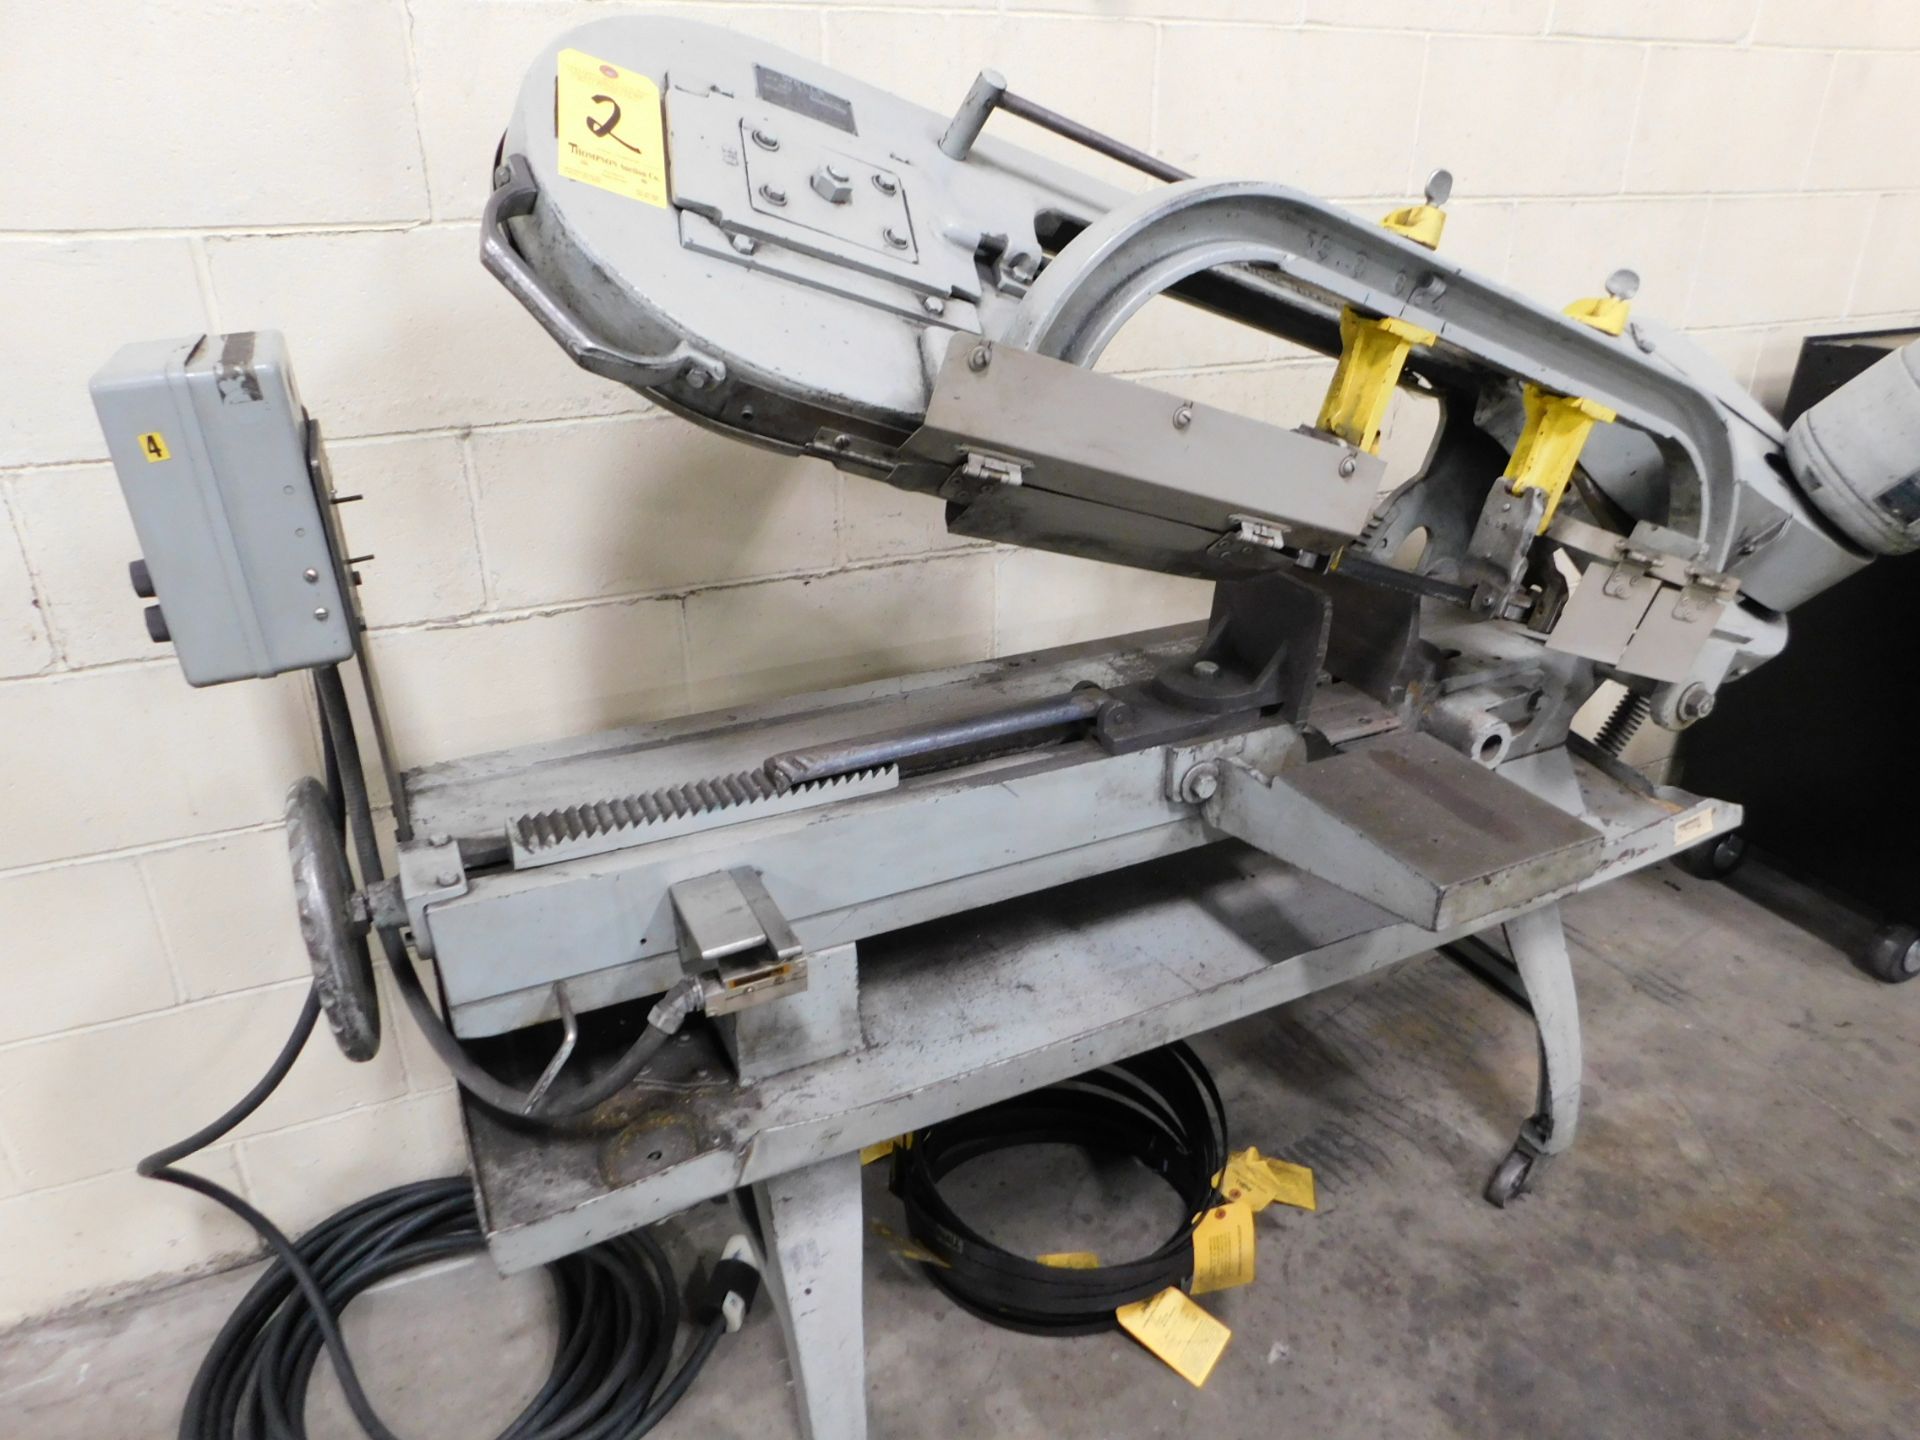 Wells Model 8-M Horizontal Band Saw SN 7175, 9 In. x 16 In. Capacity, 3/4 In. Blade, 3-phs - Image 2 of 8